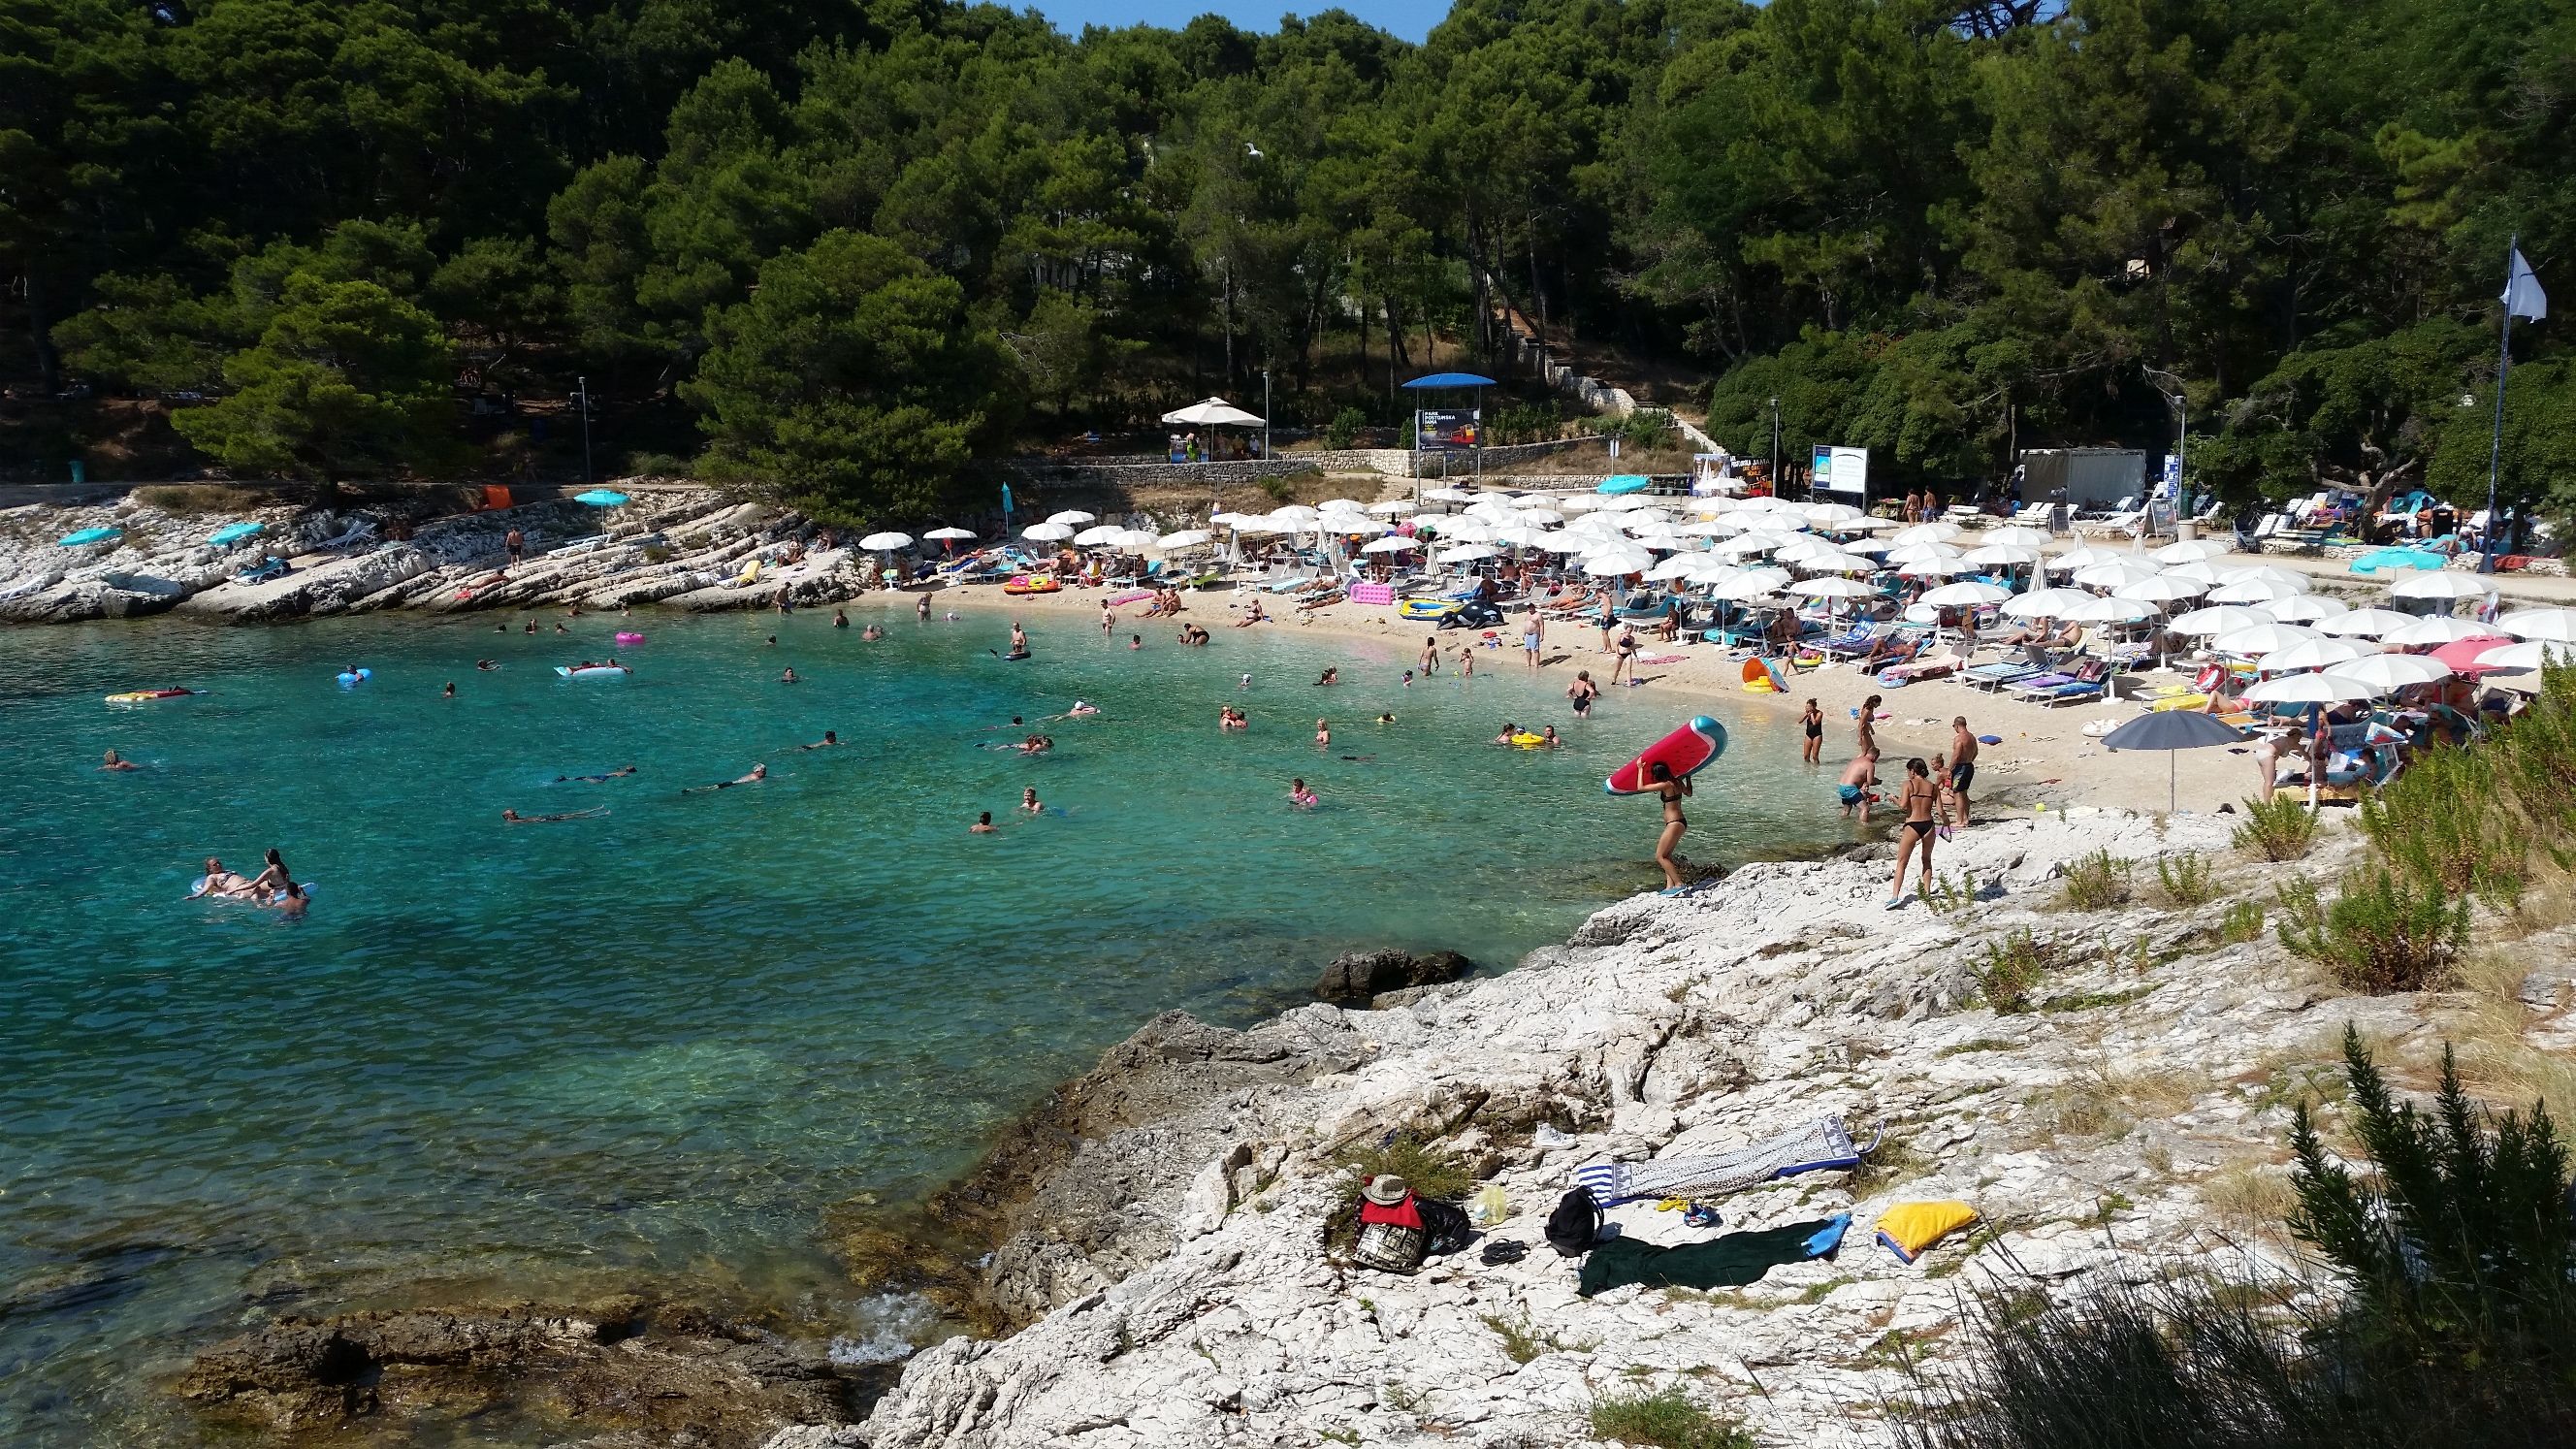 Veli žal, one of the beaches scattered around the island